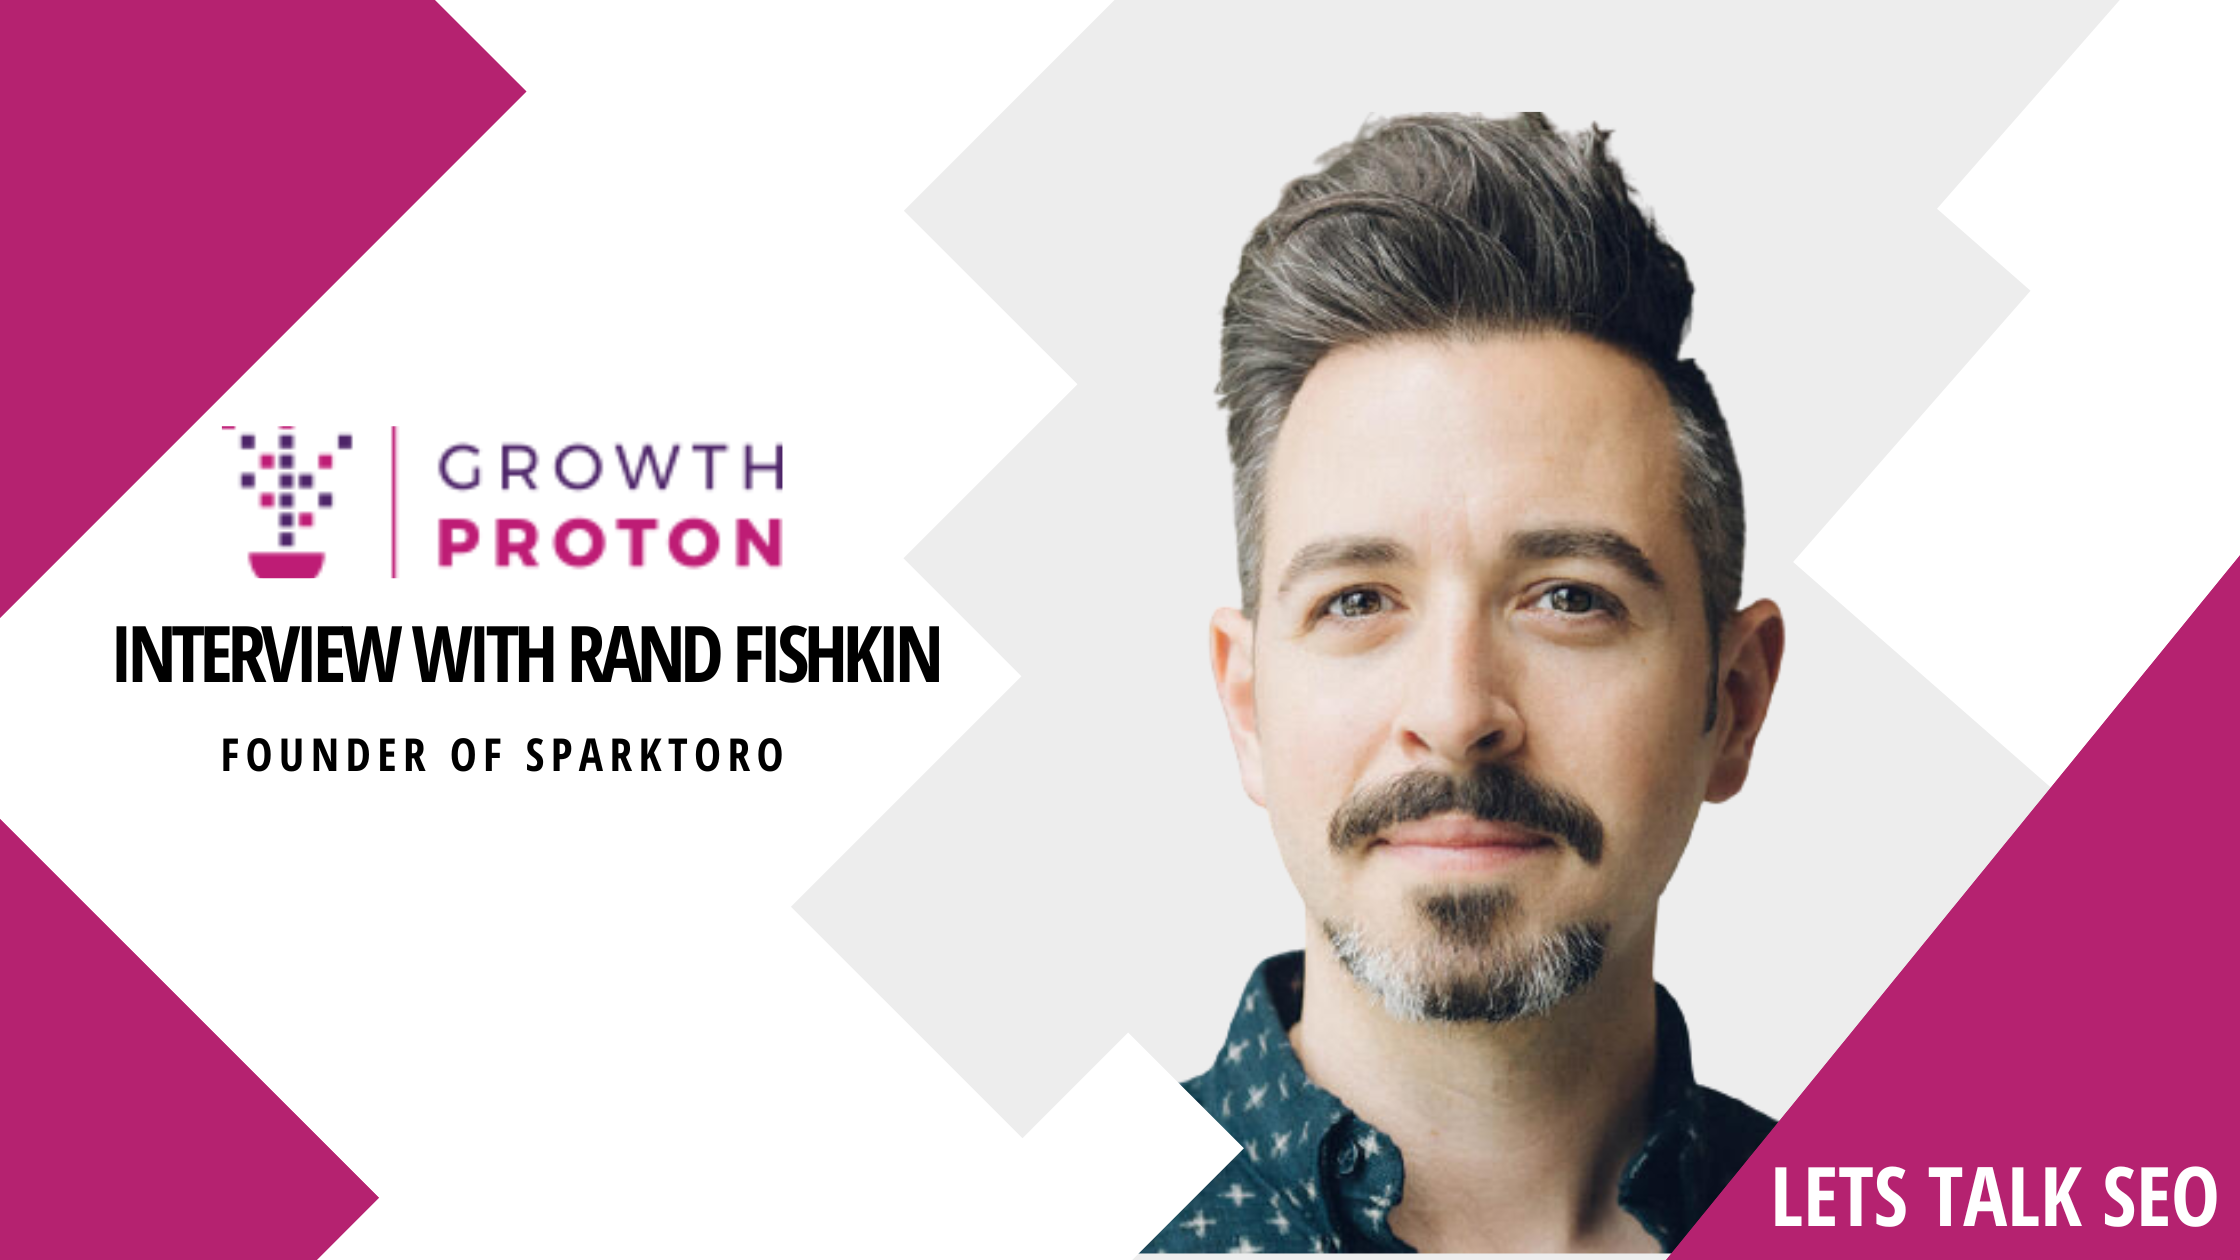 Lets Talks SEO: Interview With Rand Fishkin